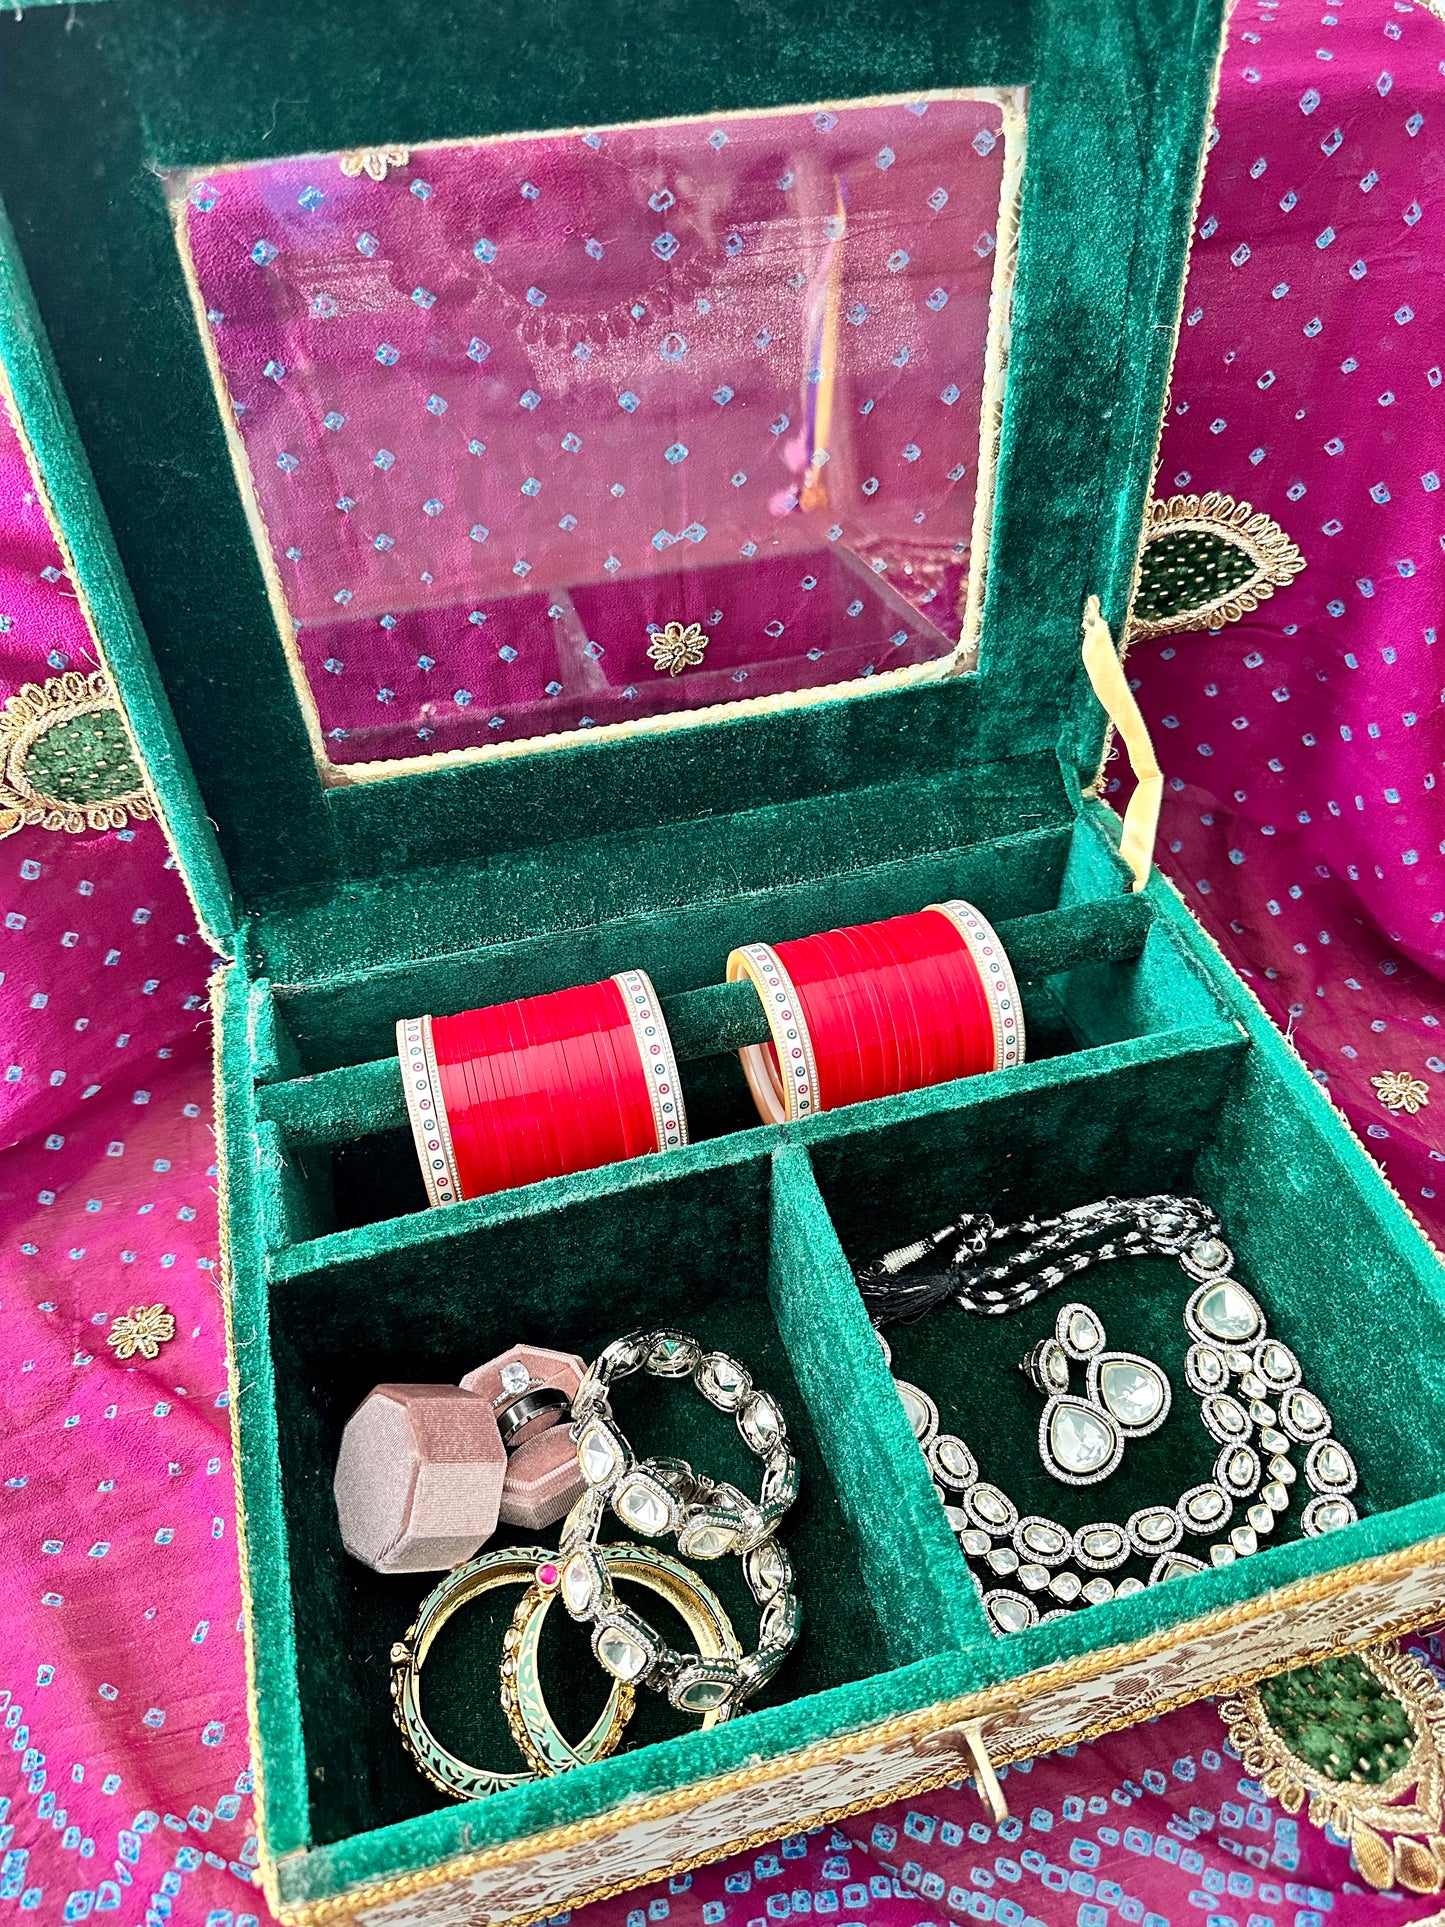 Bangles and Accessories Trousseau Box